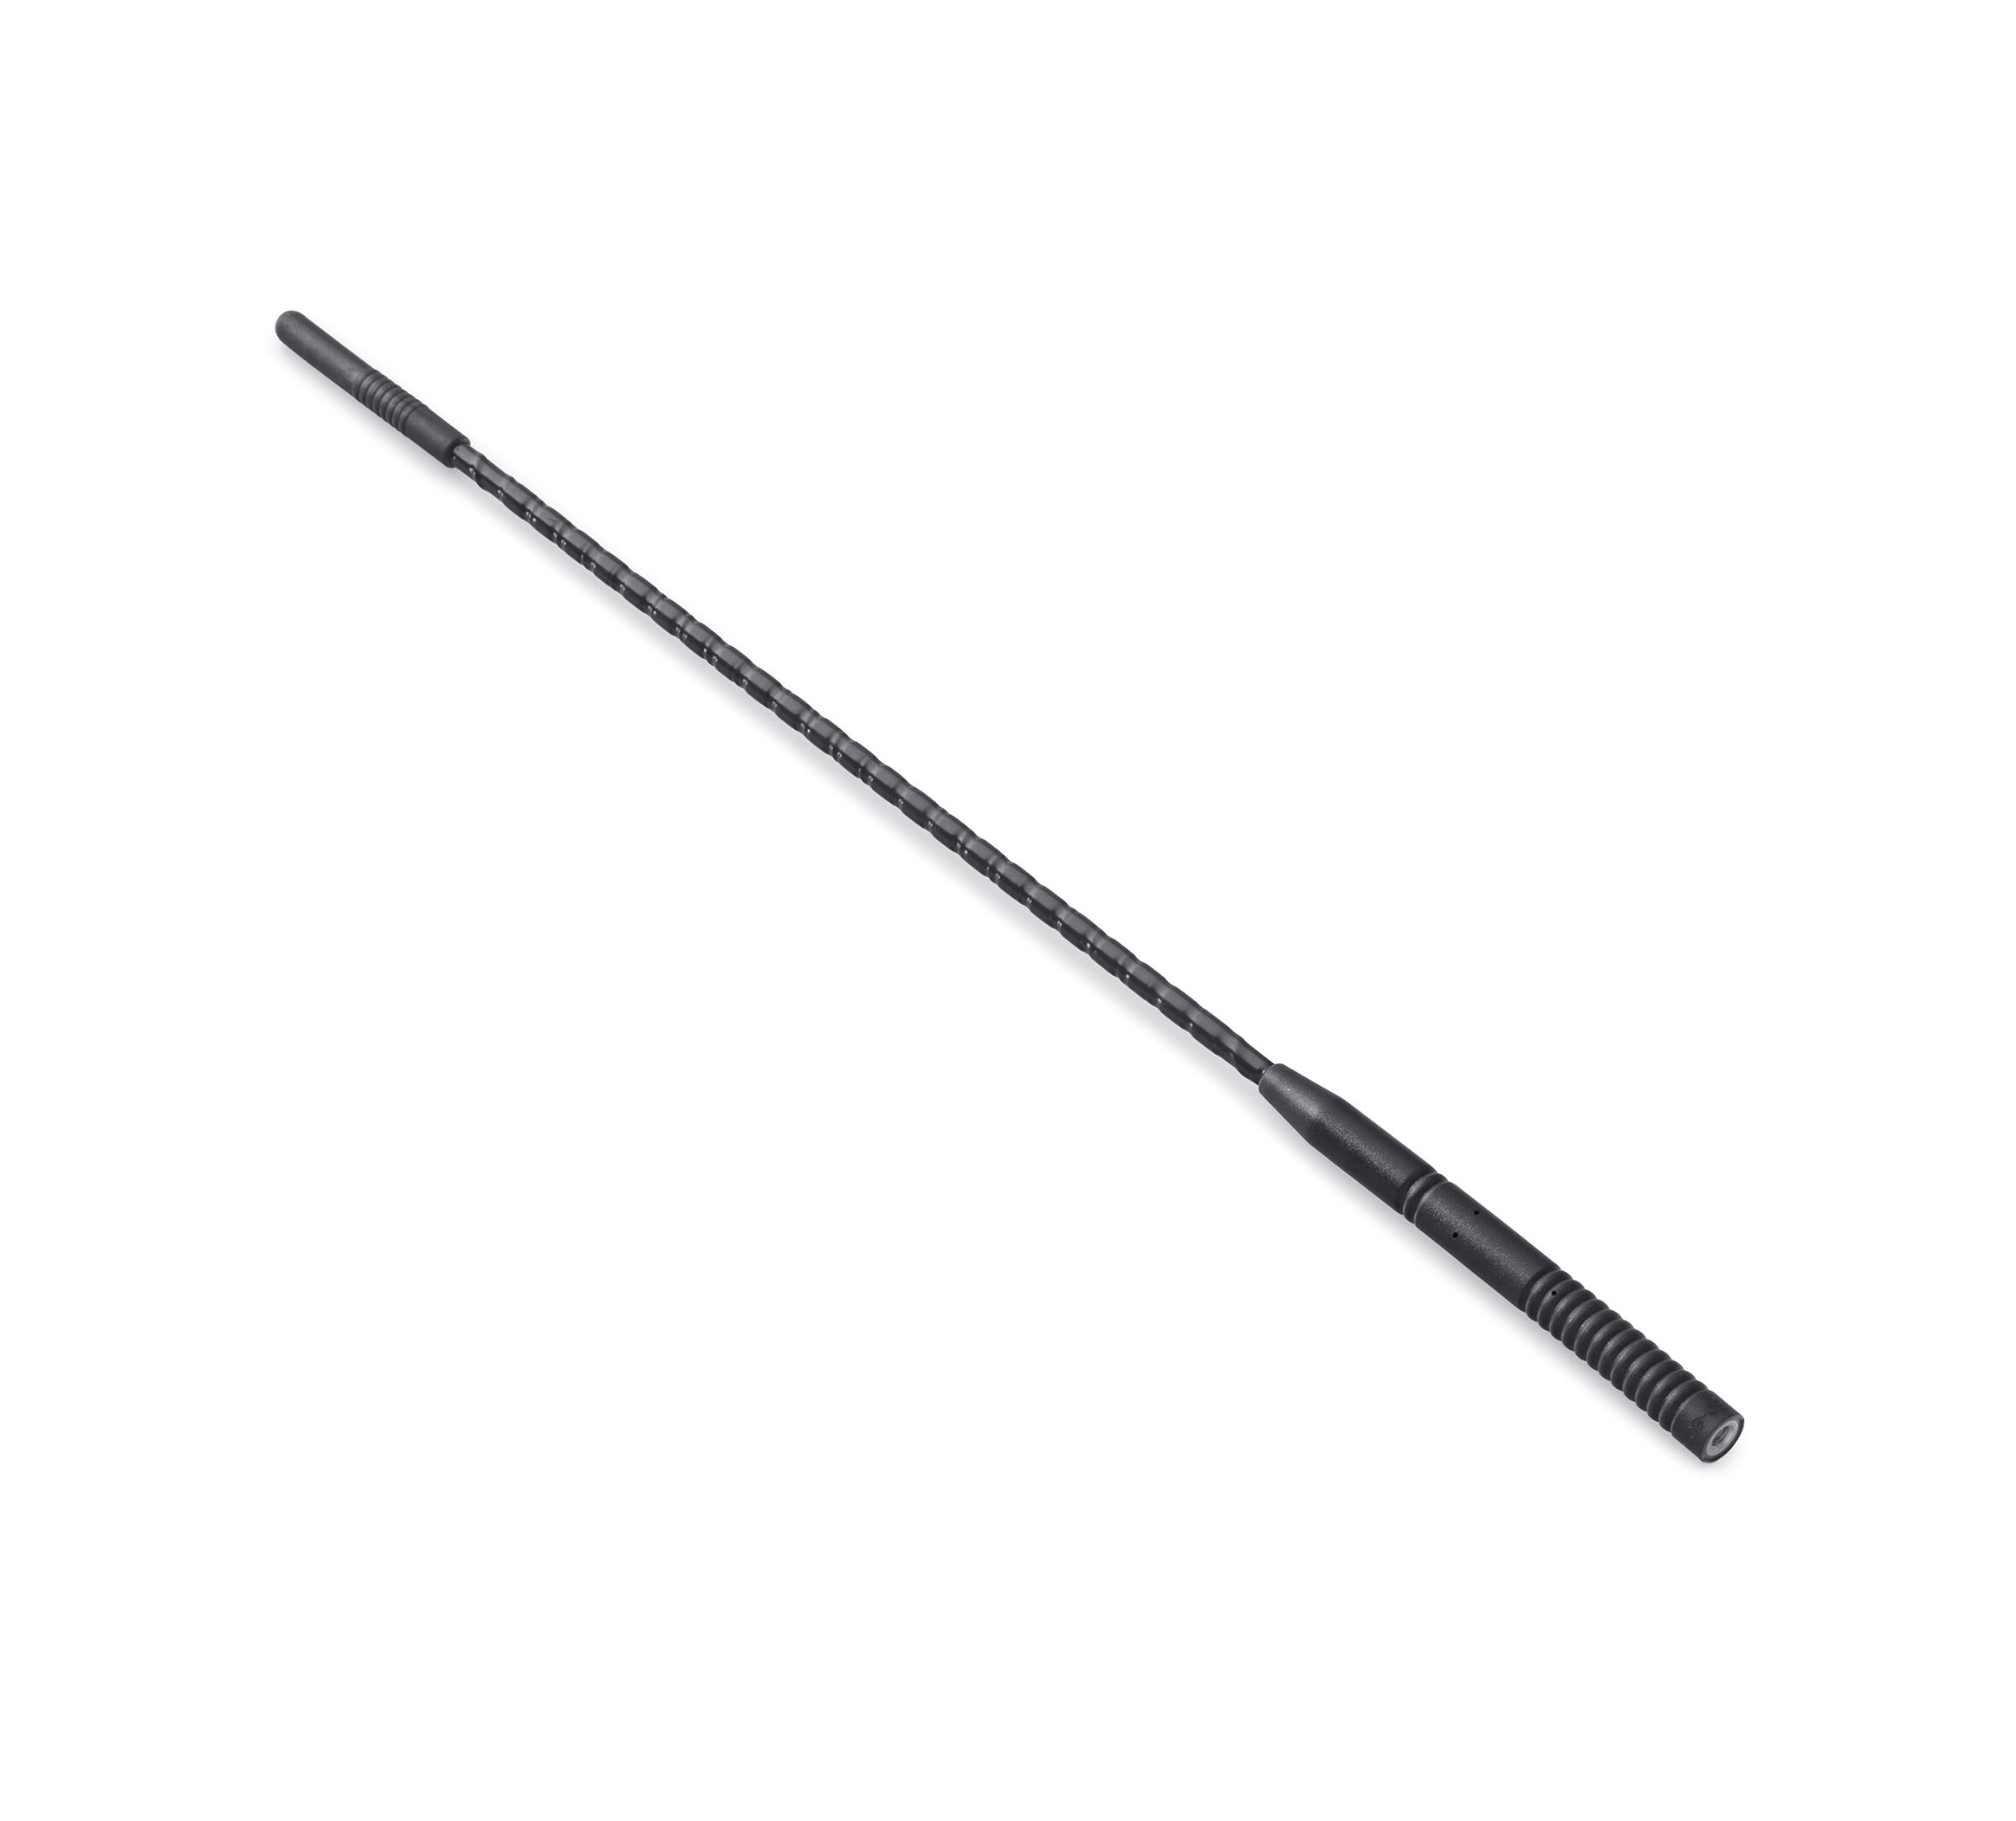 Harley-Davidson Replacement Antenna Shorty Stubby Short 4 inches Low Profile New 